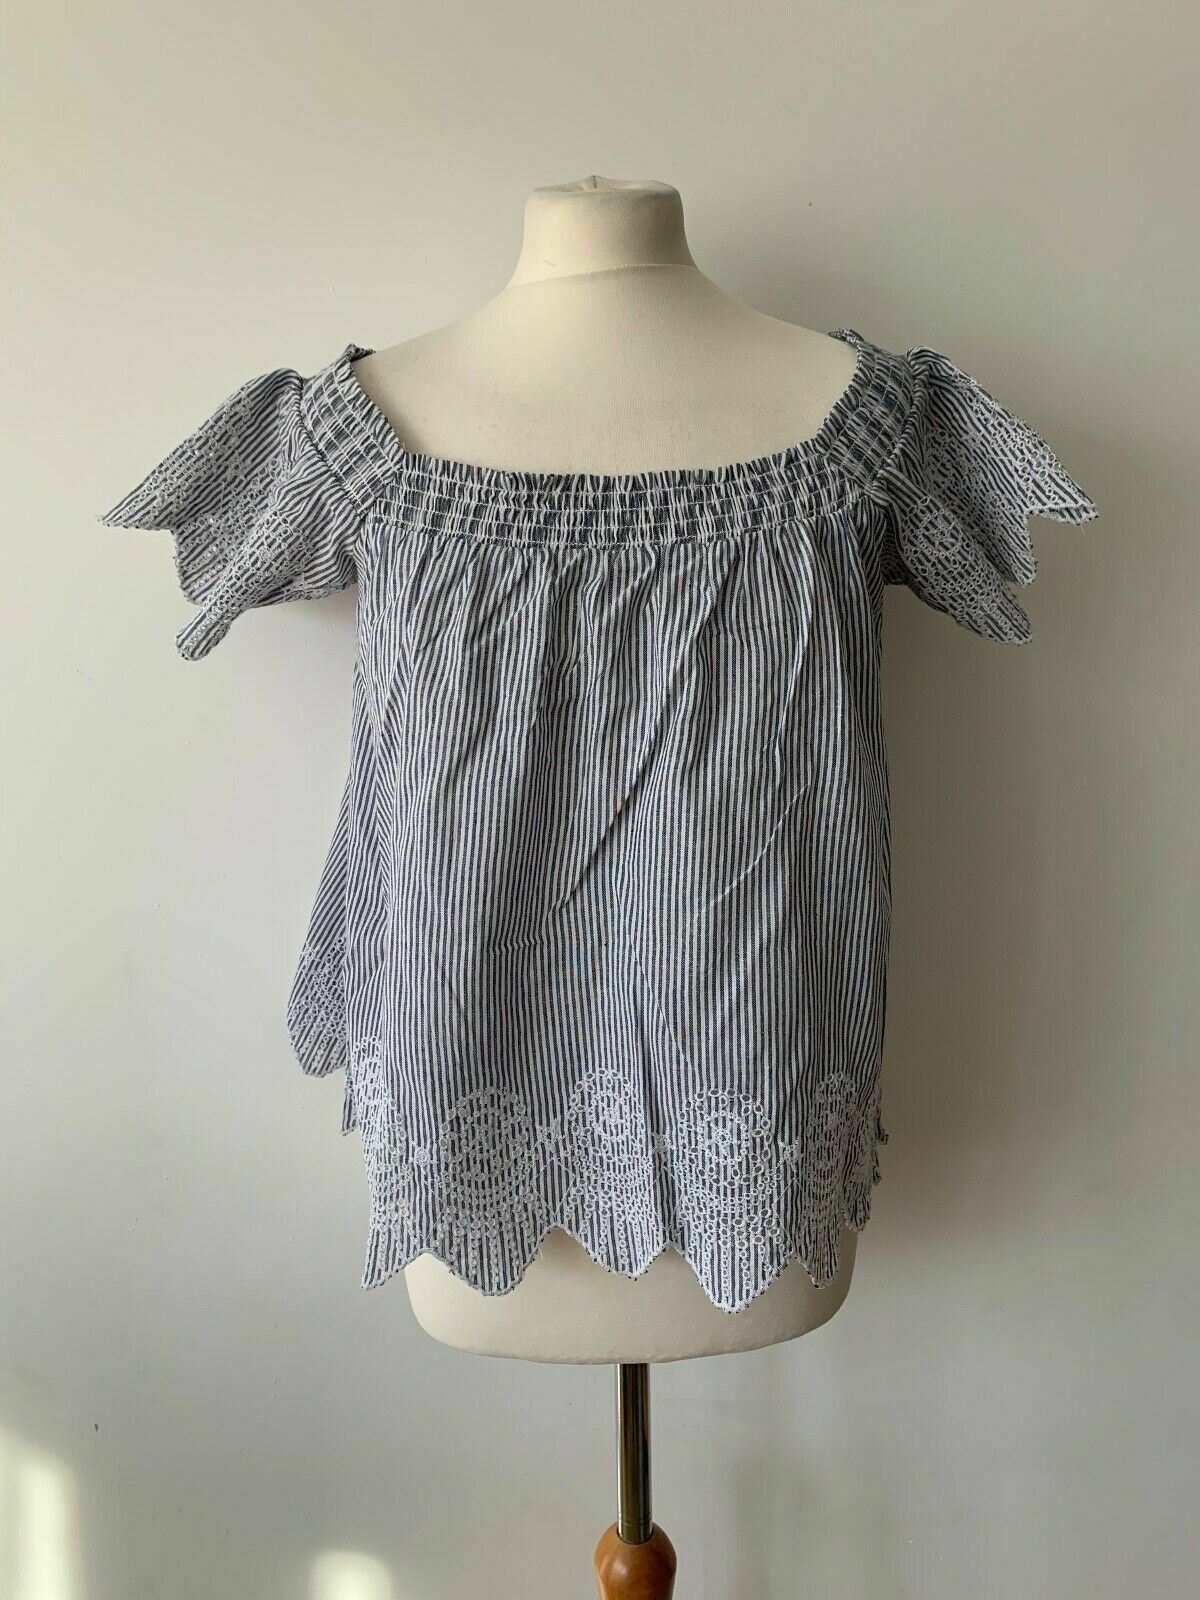 Brave Soul Broderie Anglaise Blouse Size S Elasticated Square Neck scallop hem